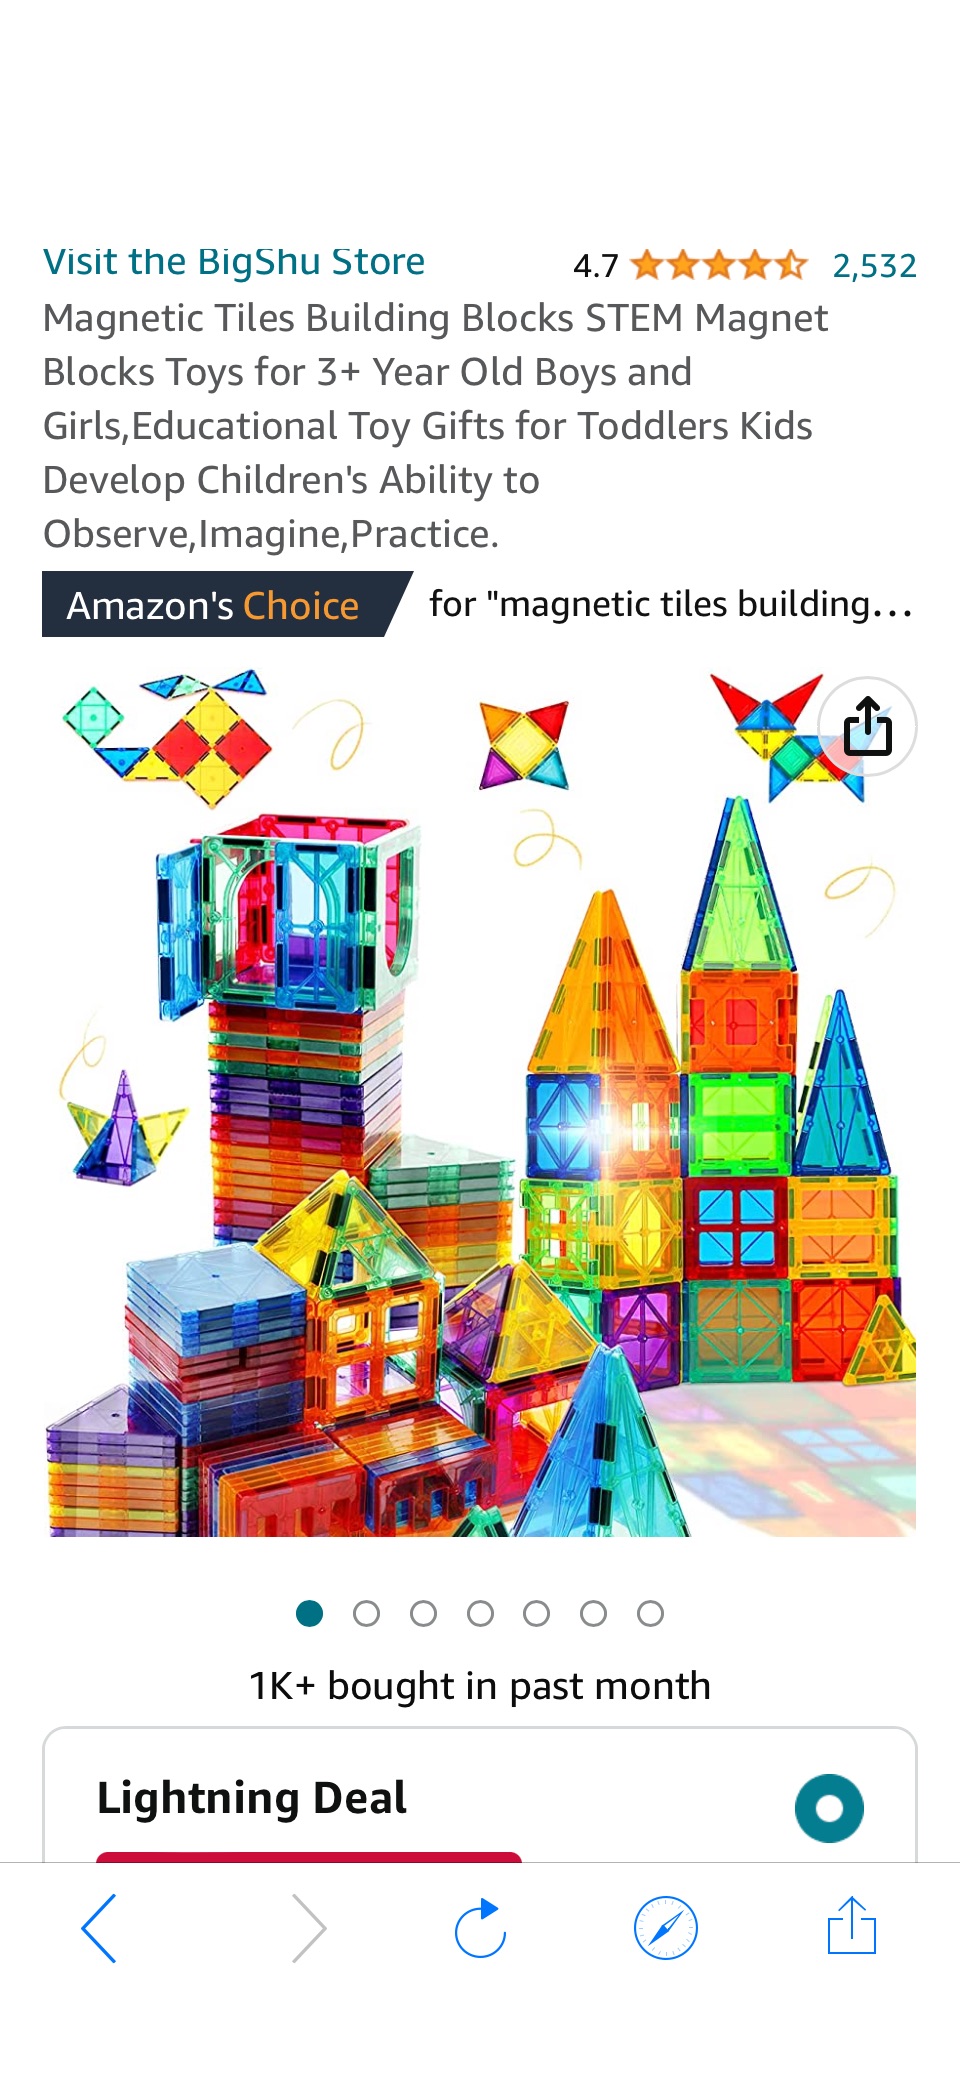 Amazon.com: Magnetic Tiles Building Blocks STEM Magnet Blocks Toys for 3+ Year Old Boys and Girls,Educational Toy Gifts for Toddlers Kids Develop原价49.99